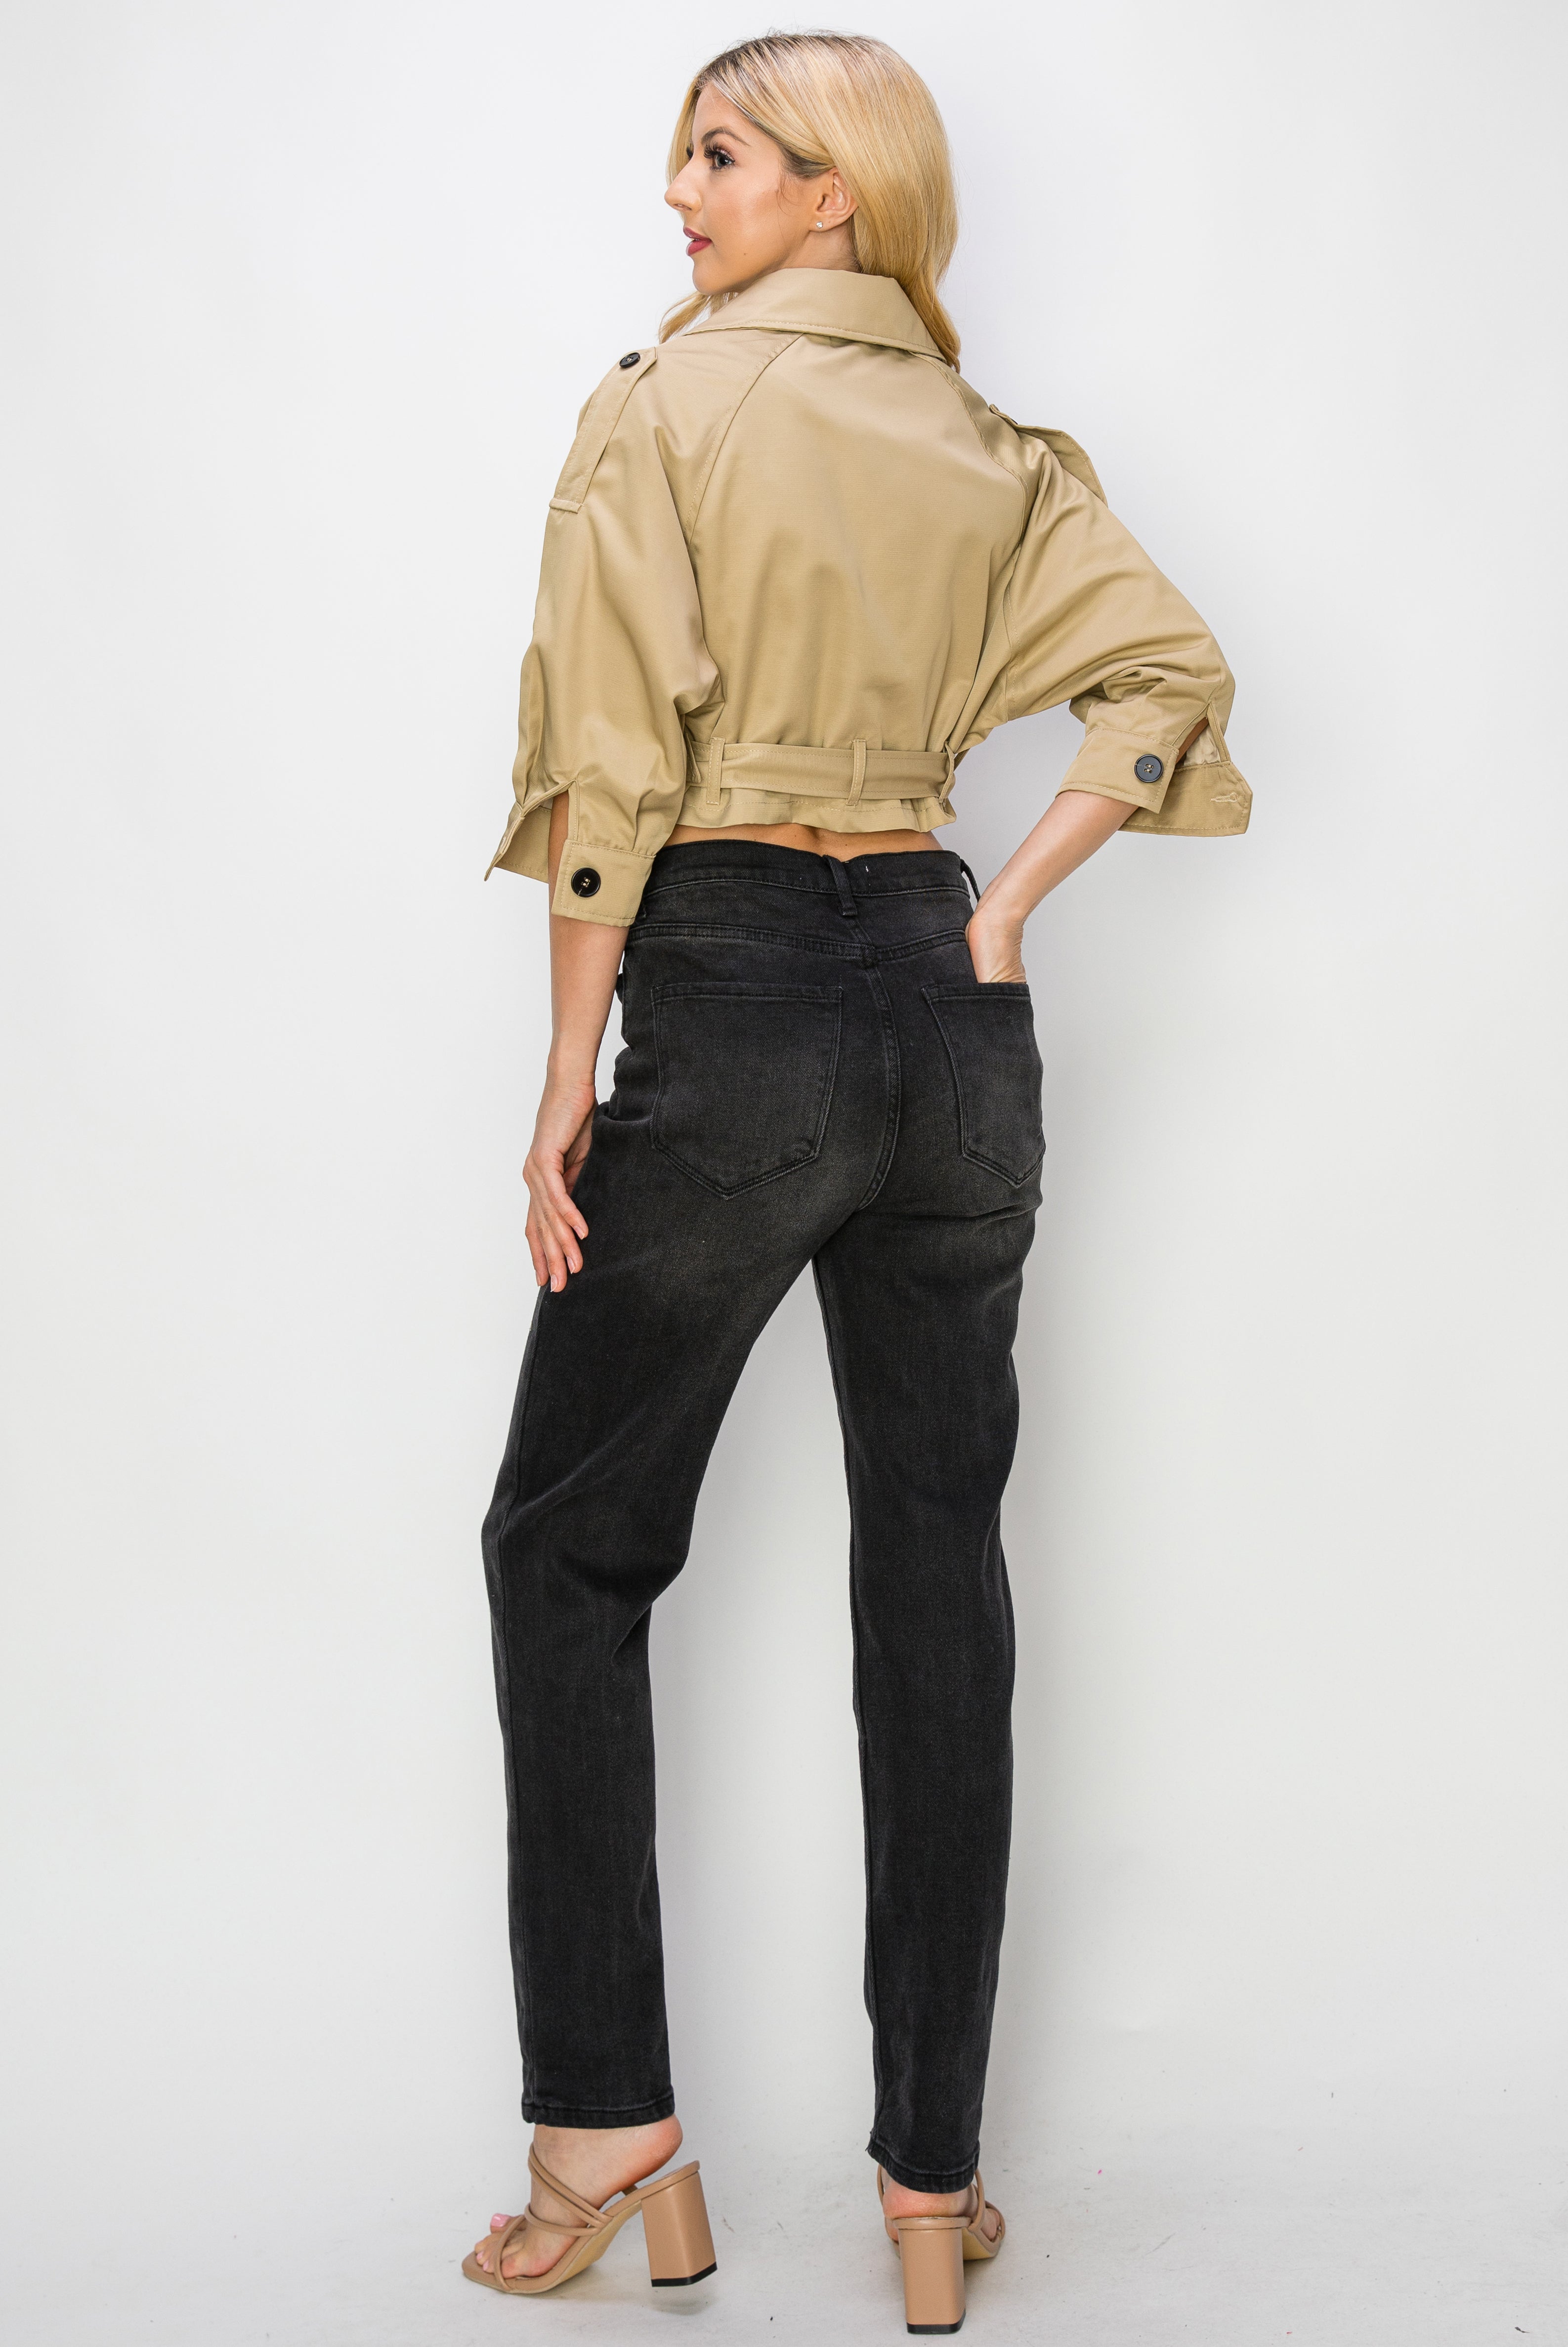 A model wearing a cropped trench jacket backside view against a white wall. 